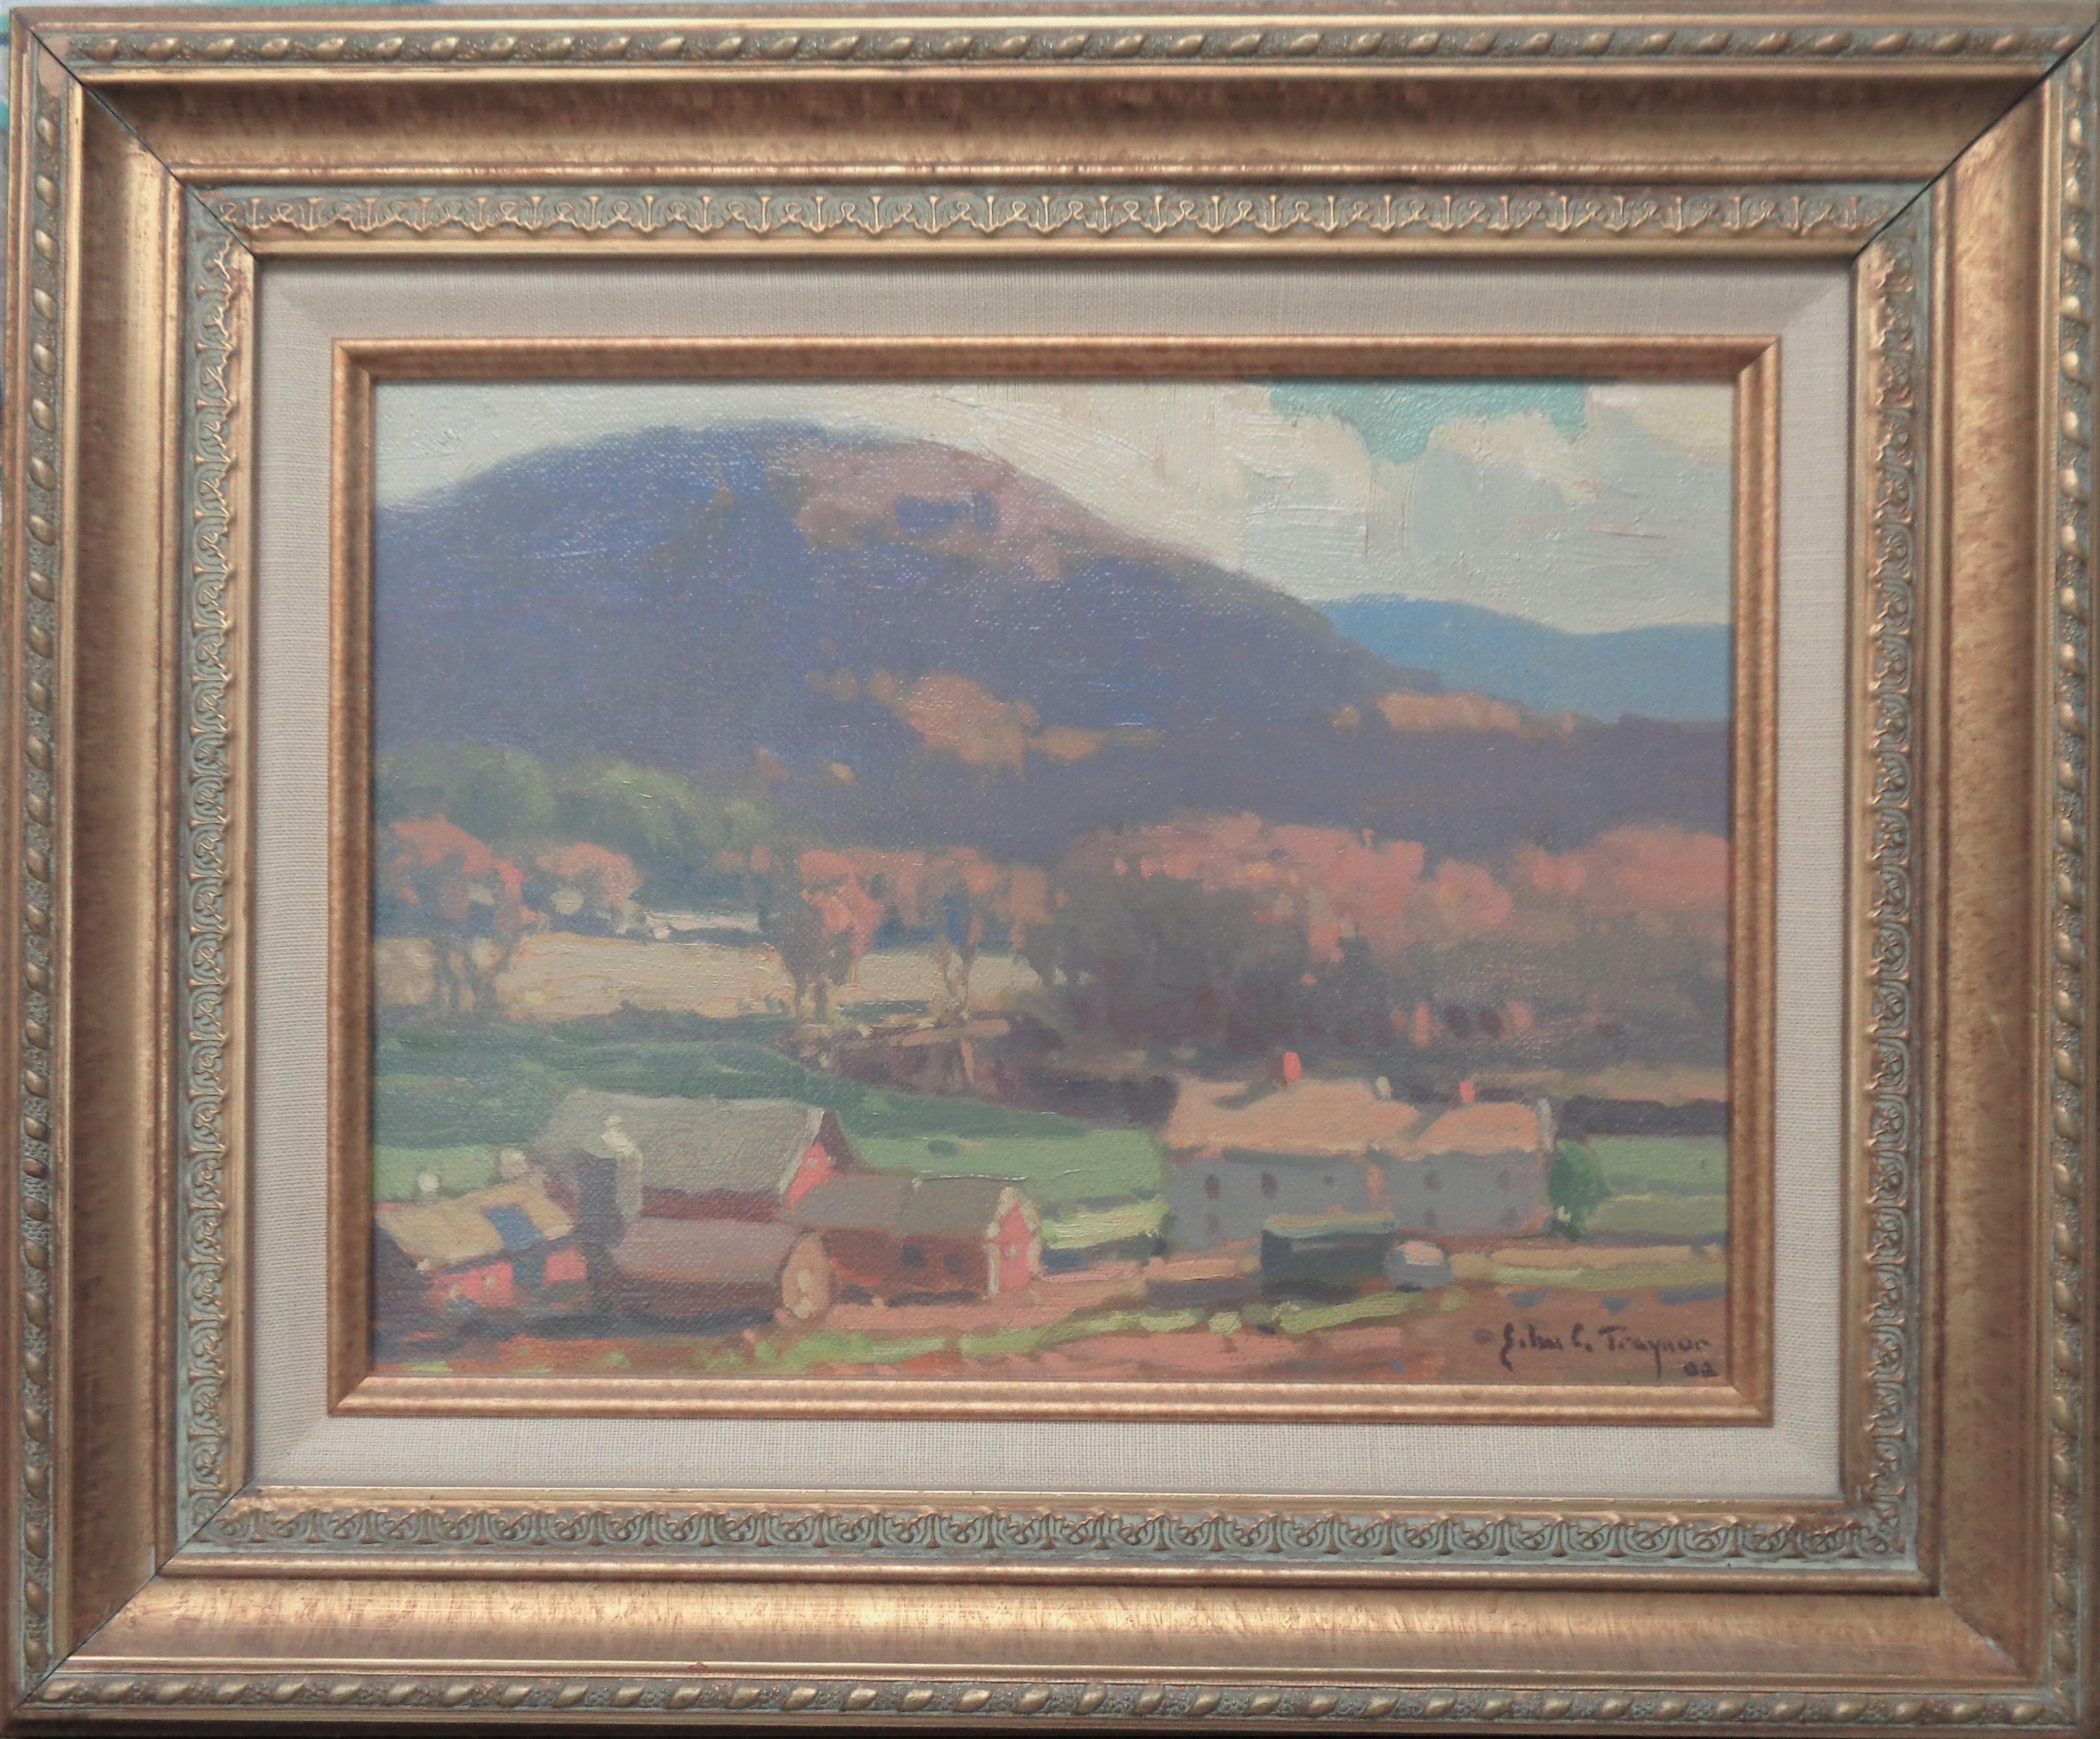 John C Traynor
The Kelly Farm
oil/linen 9 x 12 image
Purchased at the Salmagundi Club in 2003. This is one of  two of Johns earlier paintings I was able to purchase at the Salmagundi Club and they make a nice pair of rural scenes, but being sold